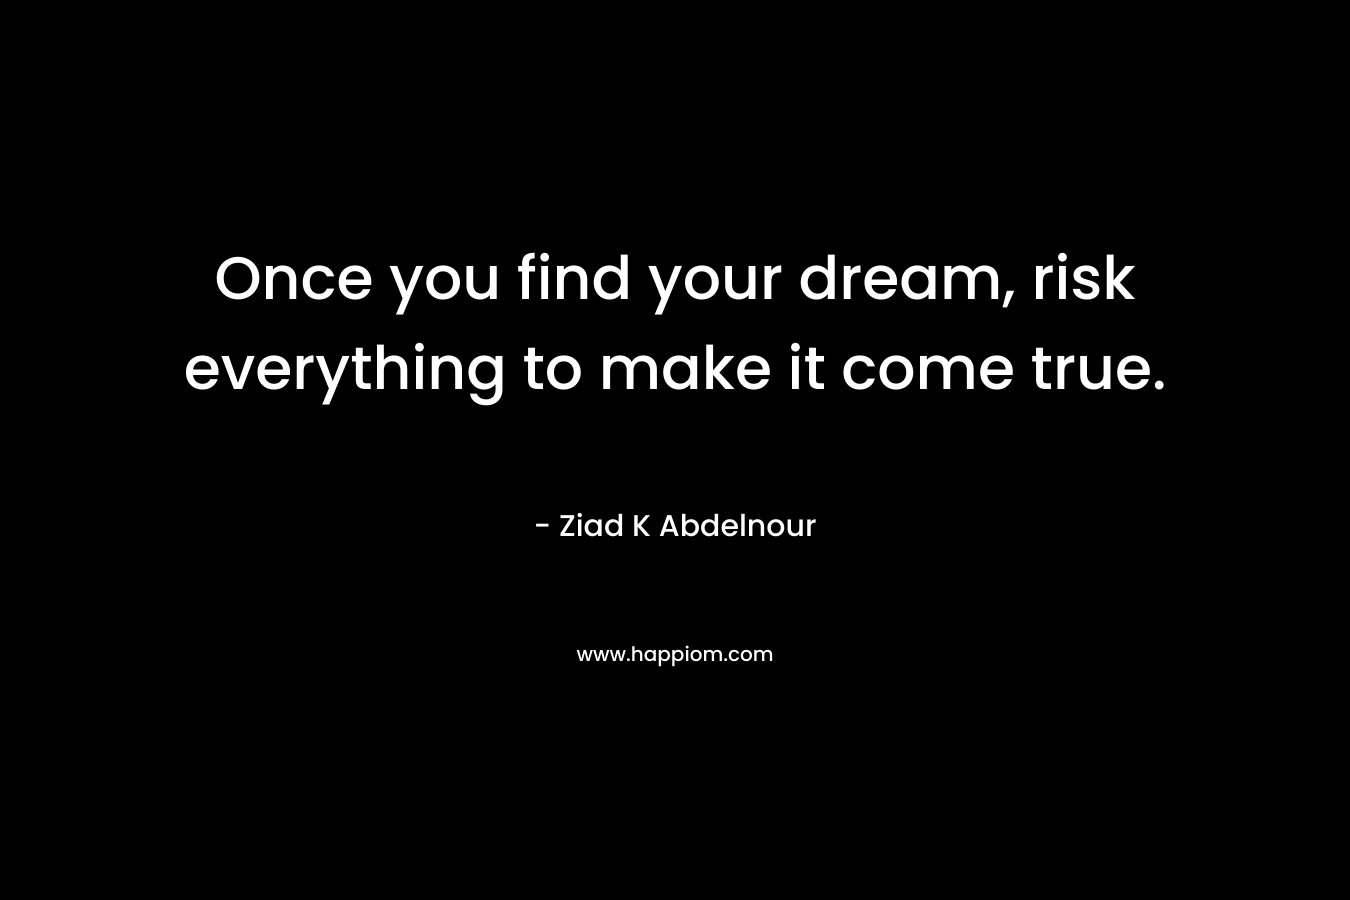 Once you find your dream, risk everything to make it come true.